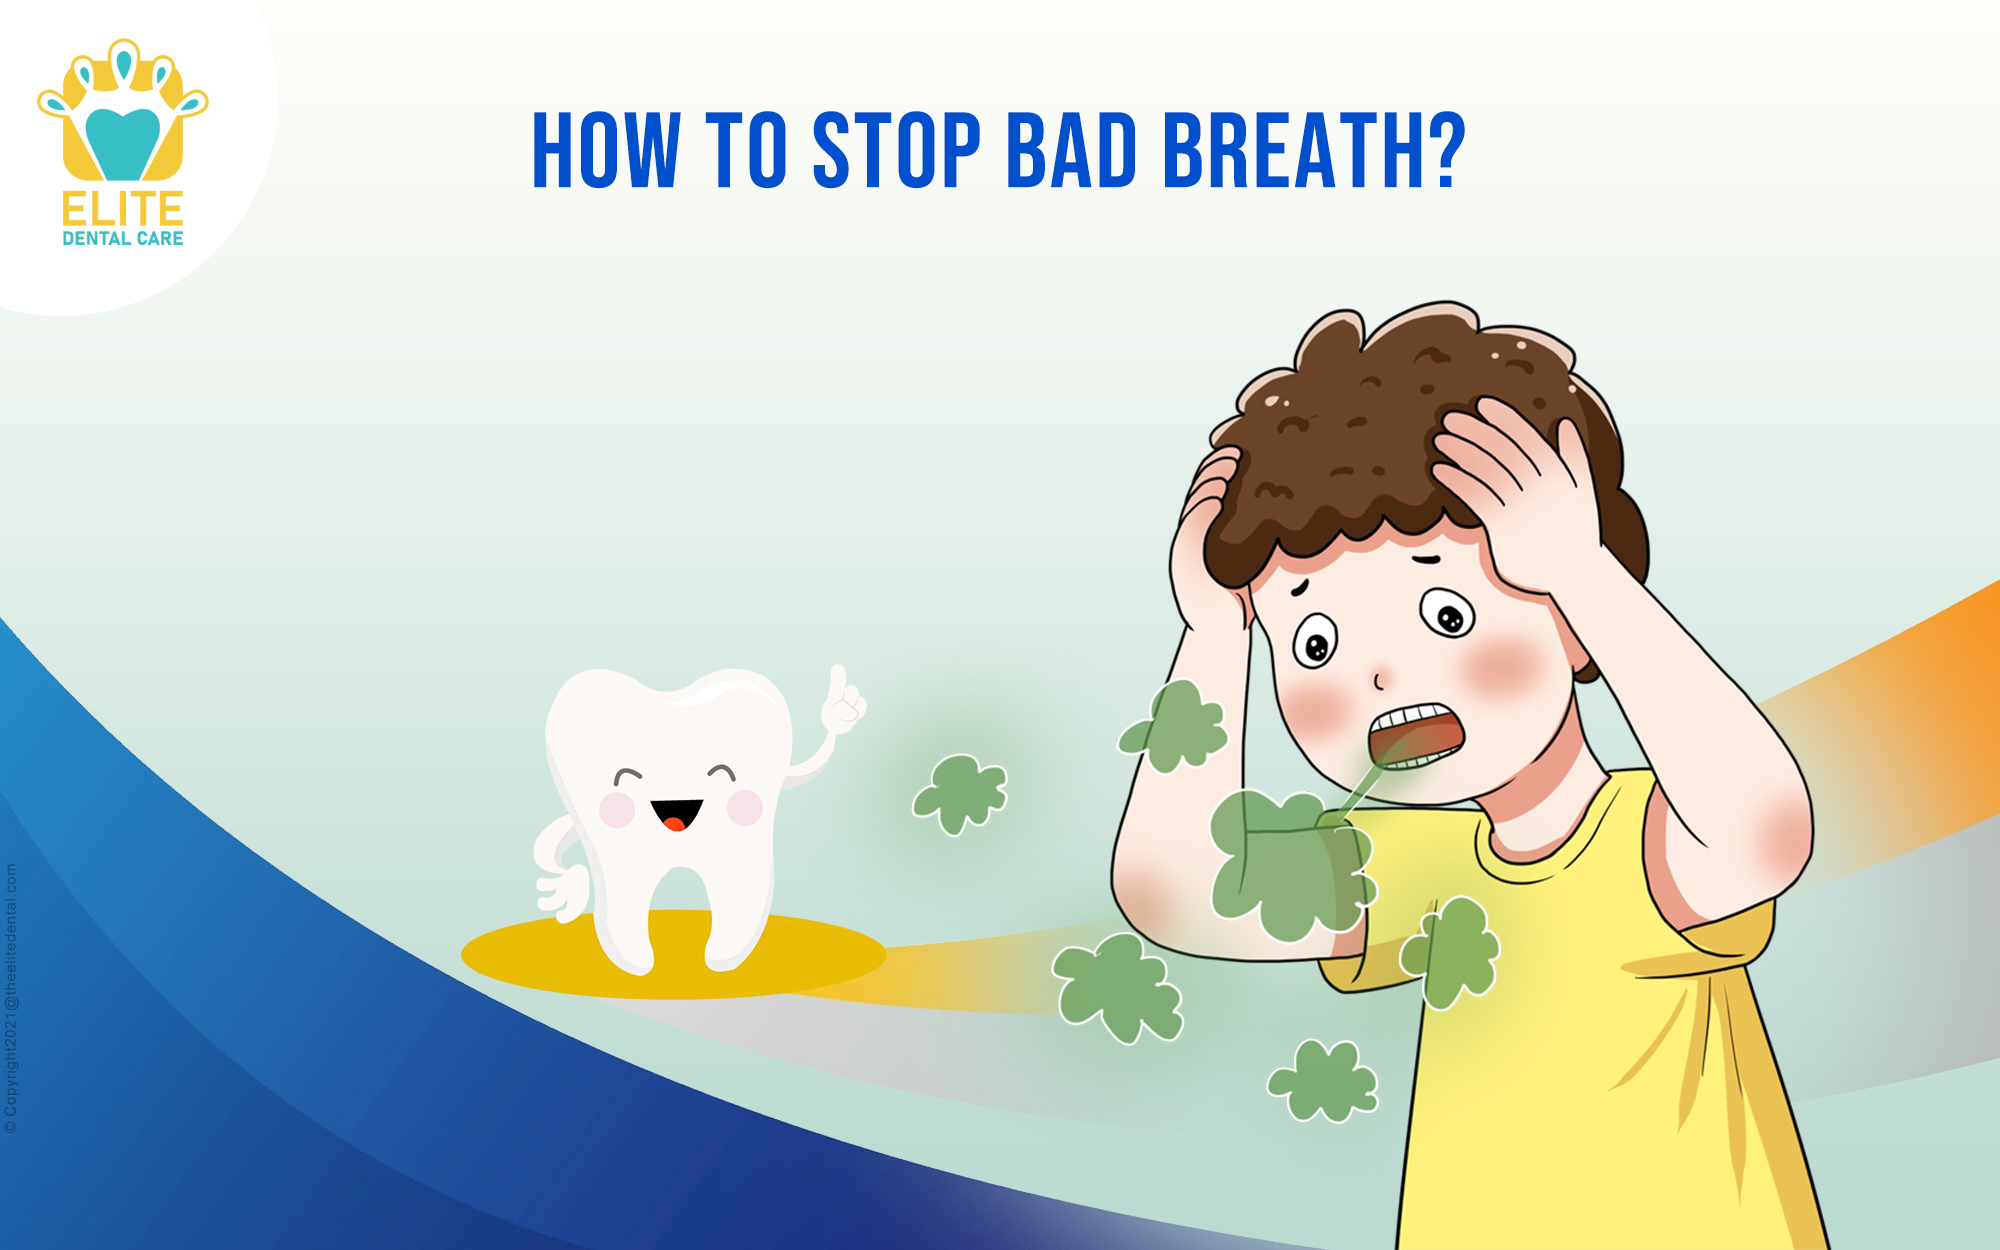 What causes Bad Breath?